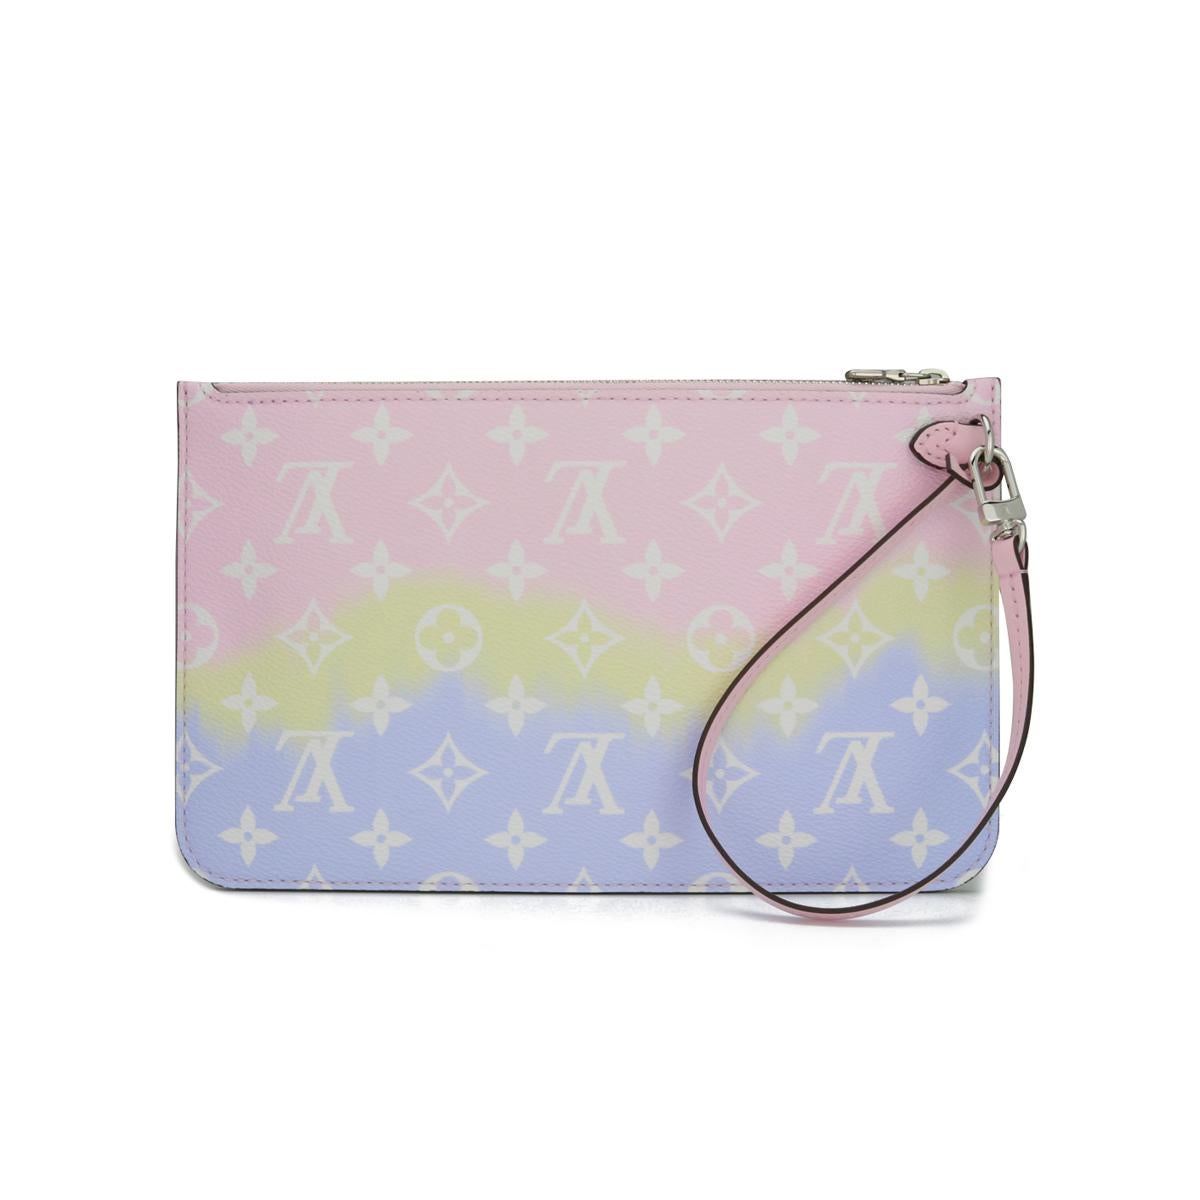 Louis Vuitton Escale Neverfull MM Bag in Pastel 2020 Limited Edition For Sale 9